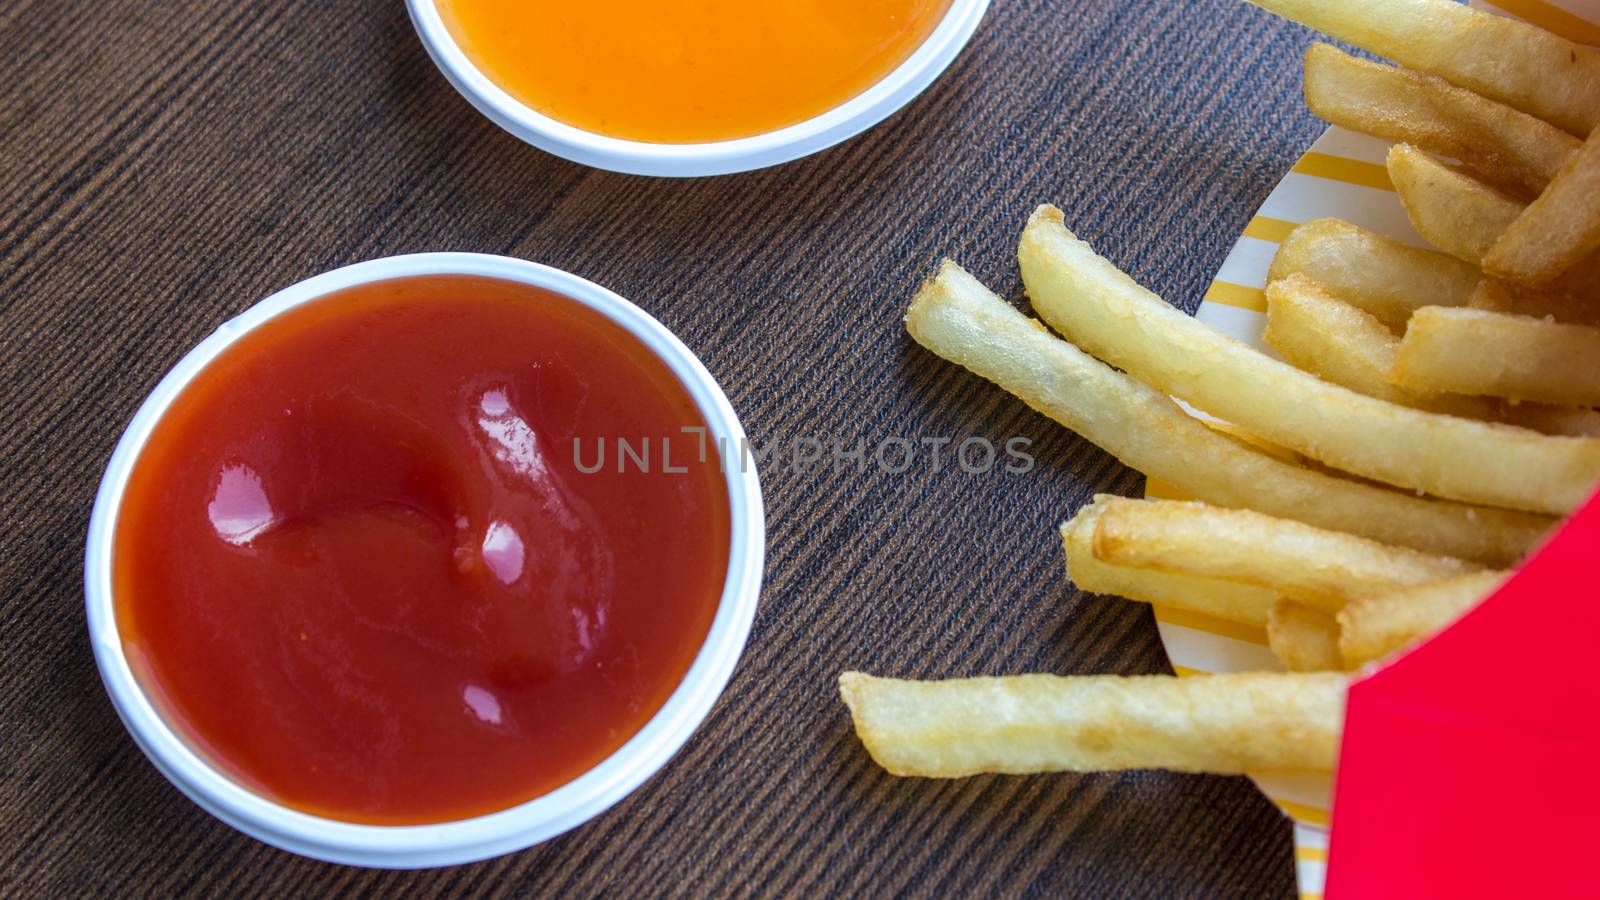 The eating fast food junk food on wood background